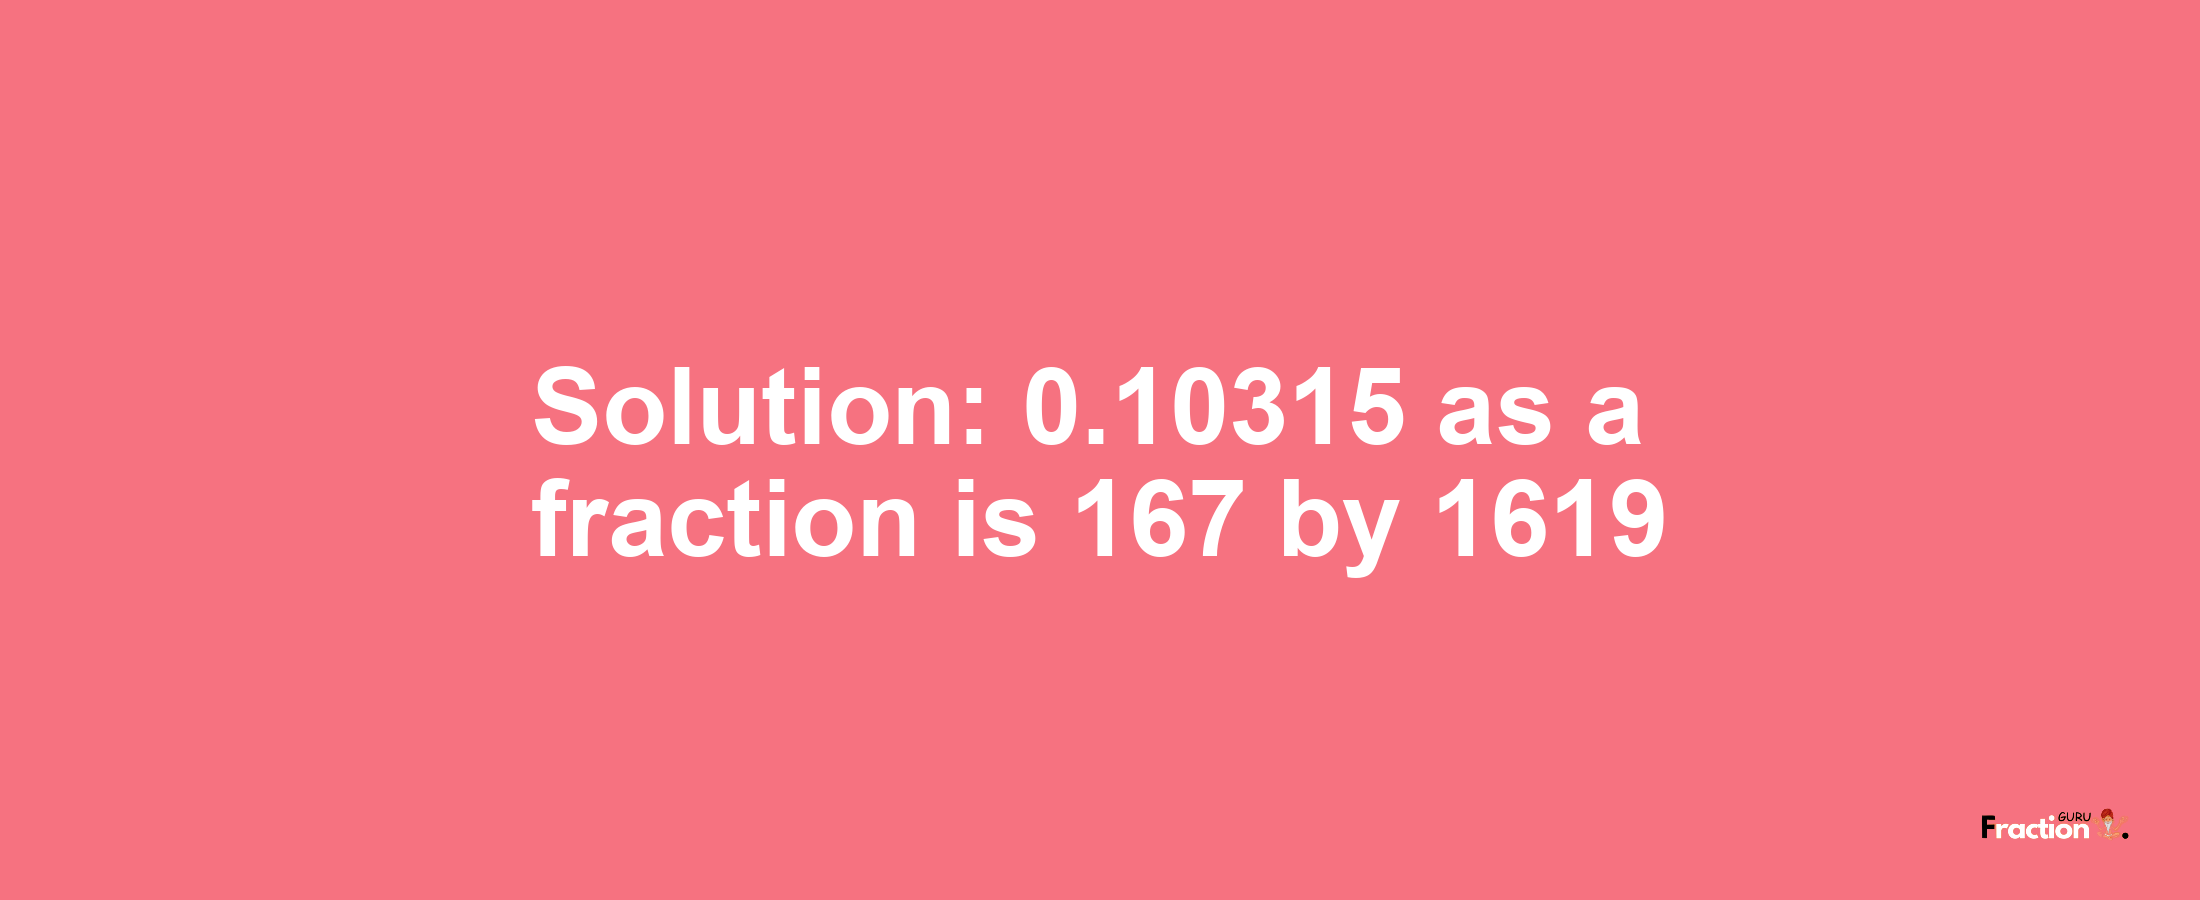 Solution:0.10315 as a fraction is 167/1619